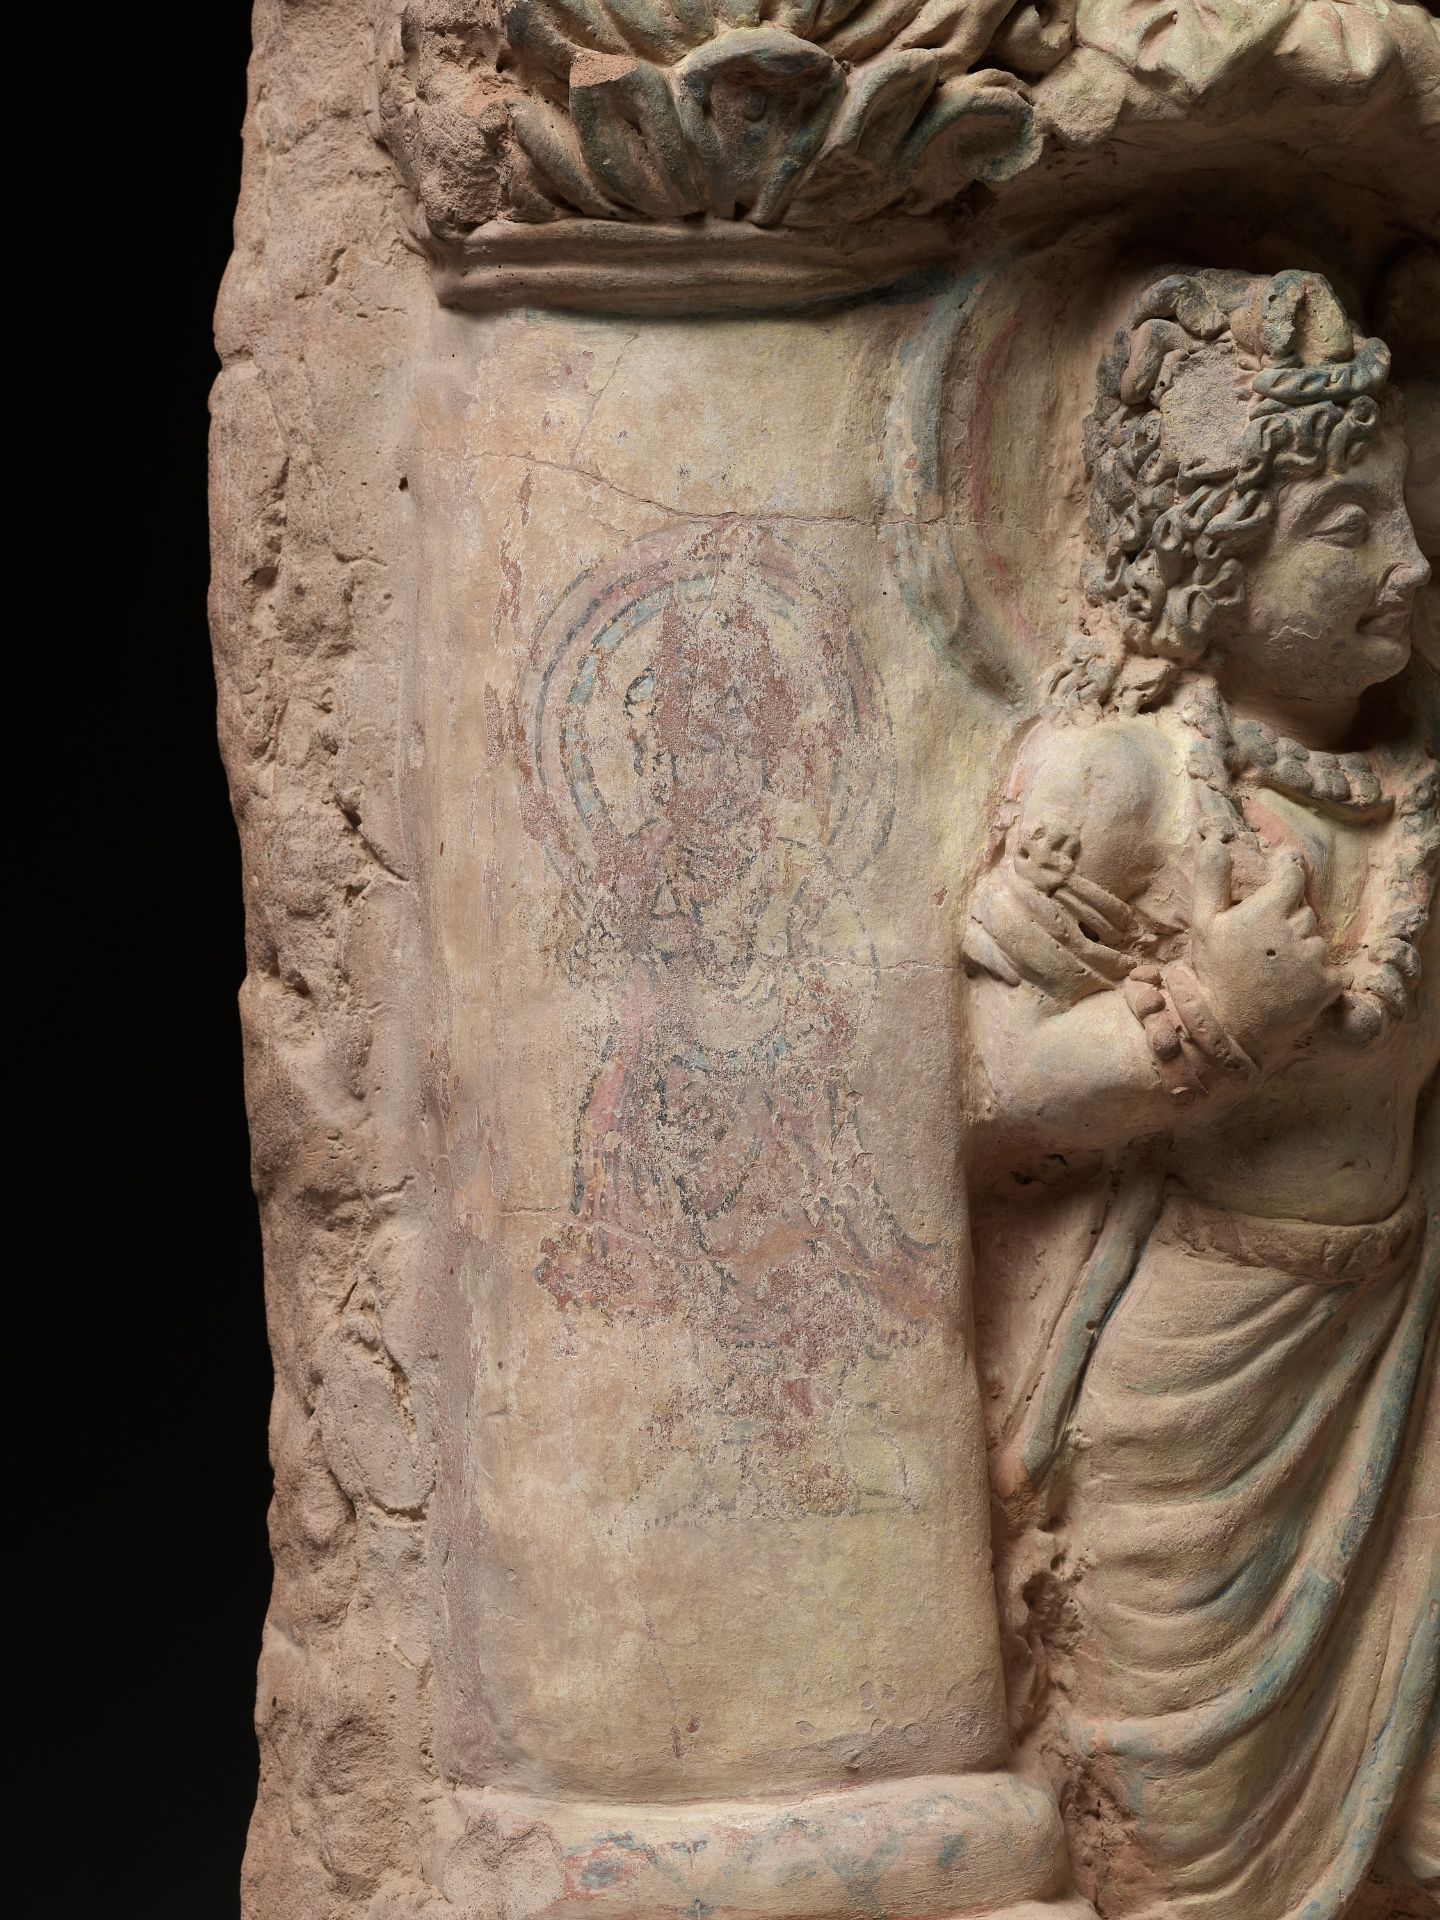 AN EXTRAORDINARILY RARE AND SPECTACULAR TERRACOTTA RELIEF OF A THINKING PRINCE SIDDHARTA UNDER THE B - Image 12 of 19